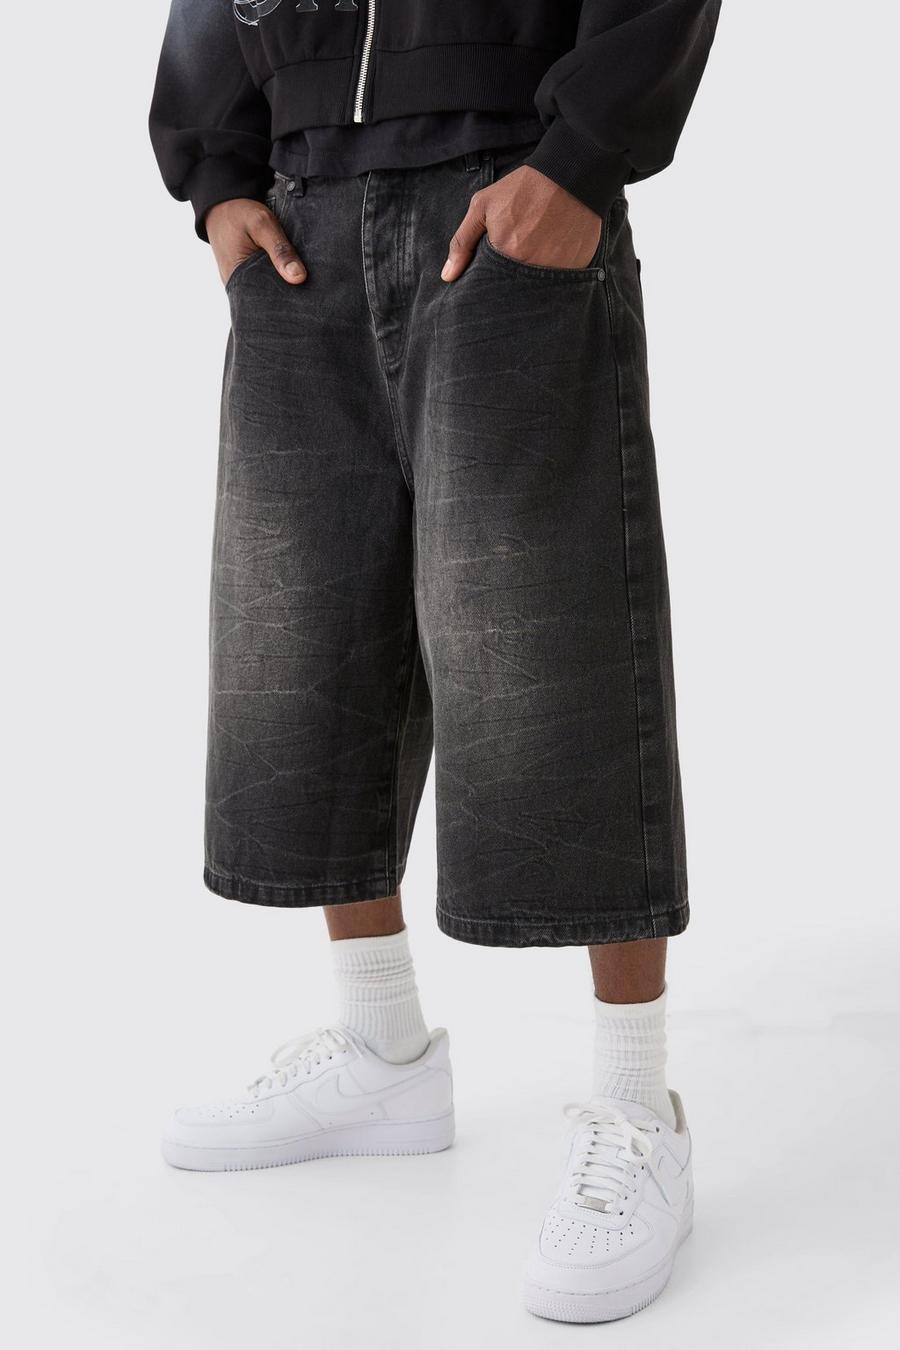 Long Line Camo Jorts In Washed Black